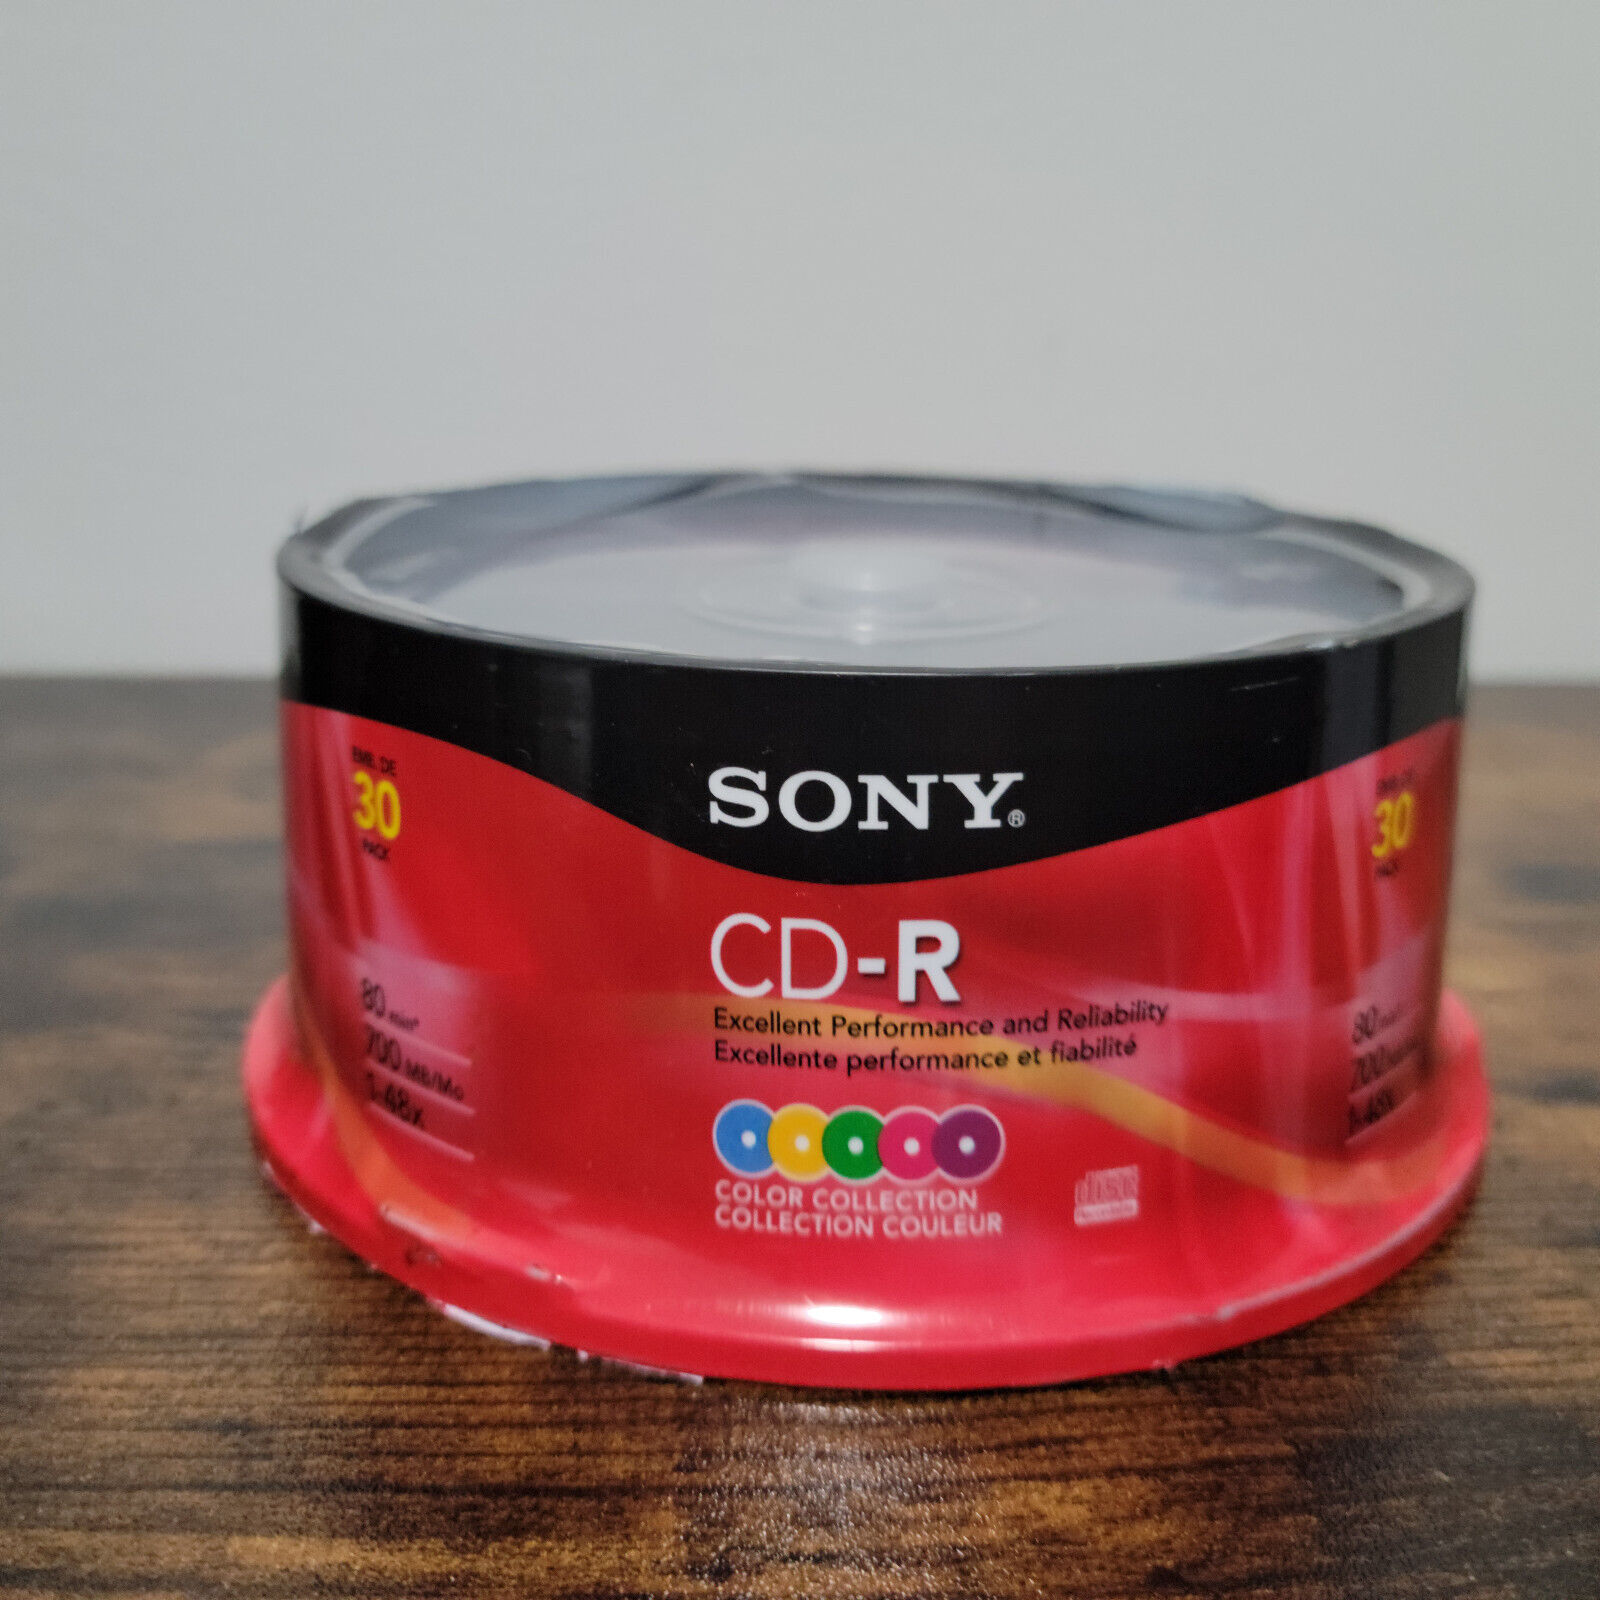 Sony CD-R 80Min 700MB 1-48X Color Collection Blank Audio Recordable Discs 30 PK